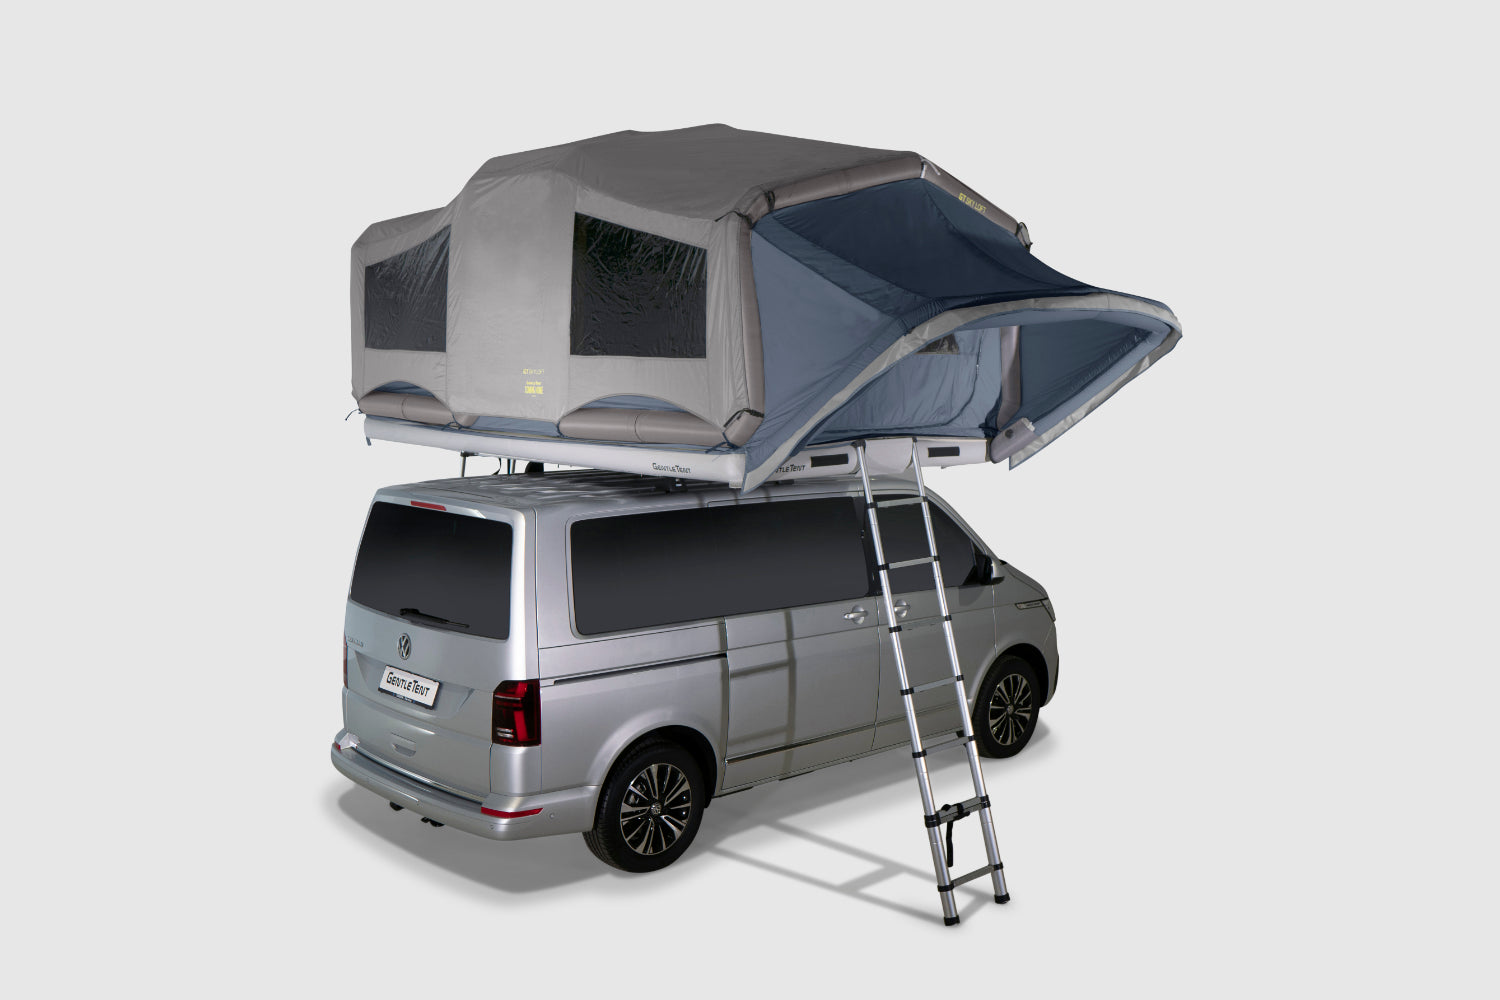 The GT SKY LOFT rooftop tent fully inflated and set up with the rain cover on